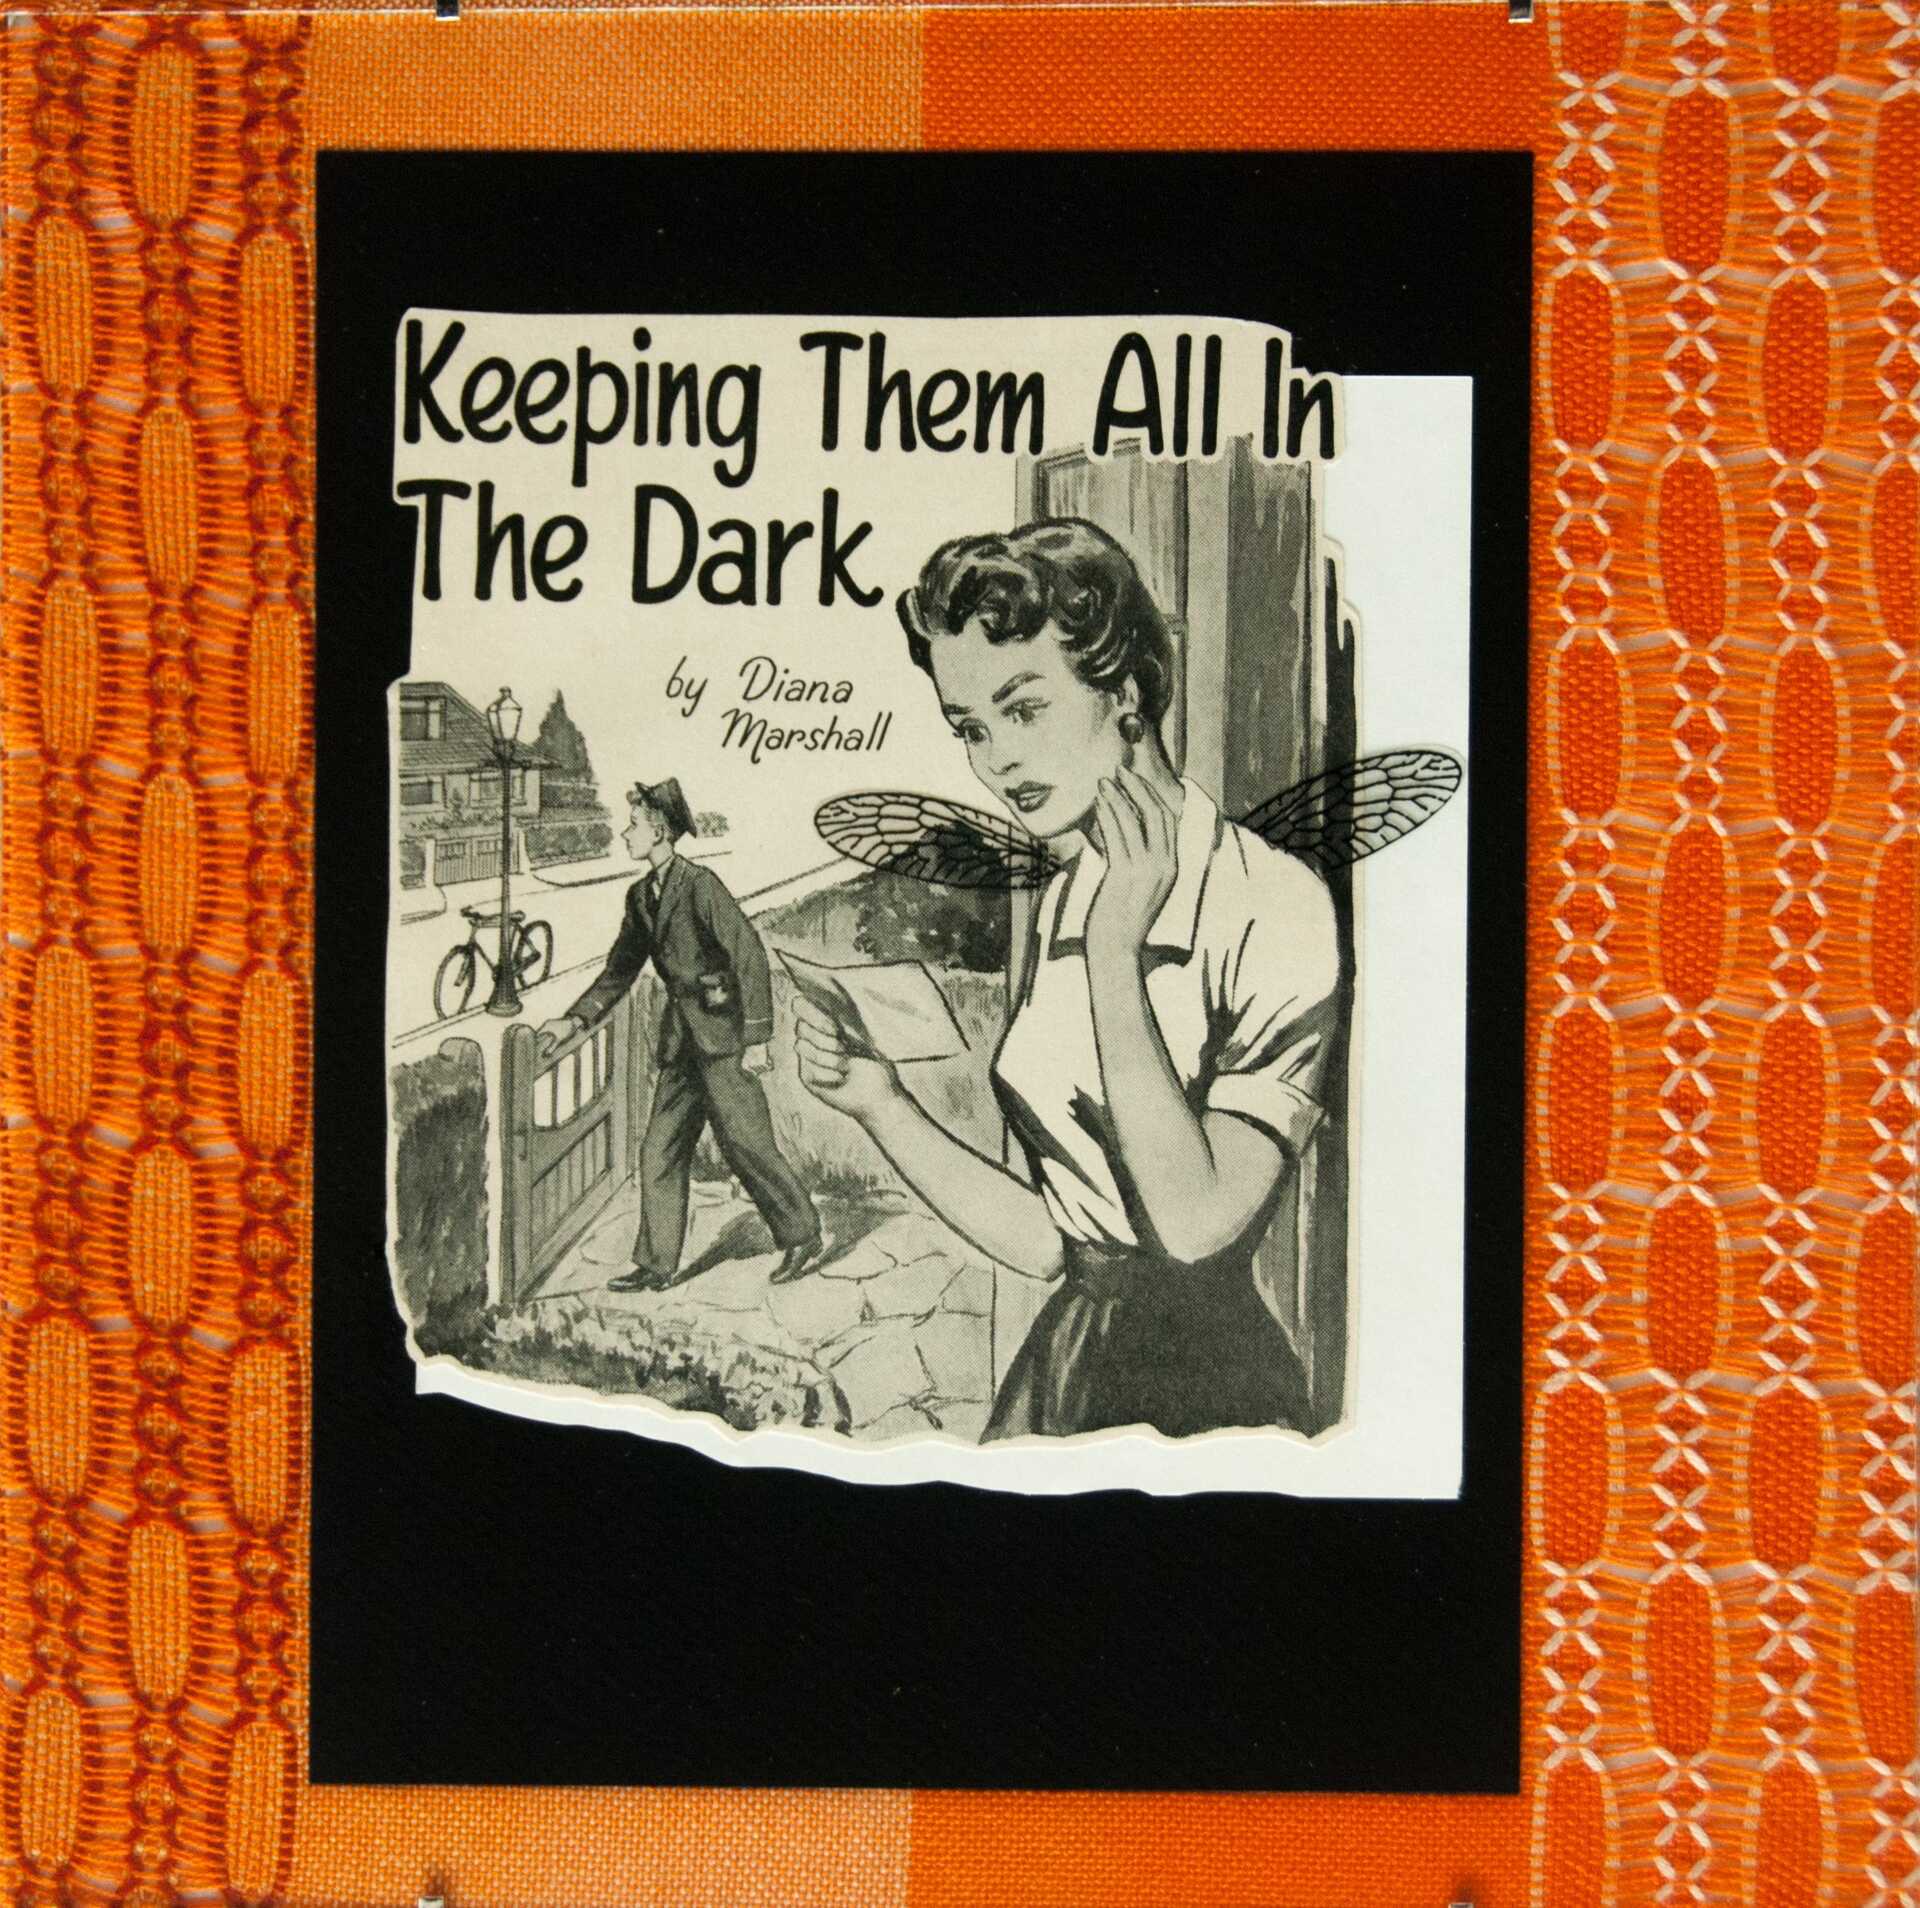 "Keeping Them All In The Dark" by Libby Bloxham. A vintage book illustration is layered over black card and textured vintage orange fabric, to create a square collage. The illustration depicts a woman looking with concern at a note in her hand, while in the background a postal worker leave through her gate, and the title 'Keeping Them All In The Dark by Diana Marshall'. Acetate insect wings have been added to the woman's back.